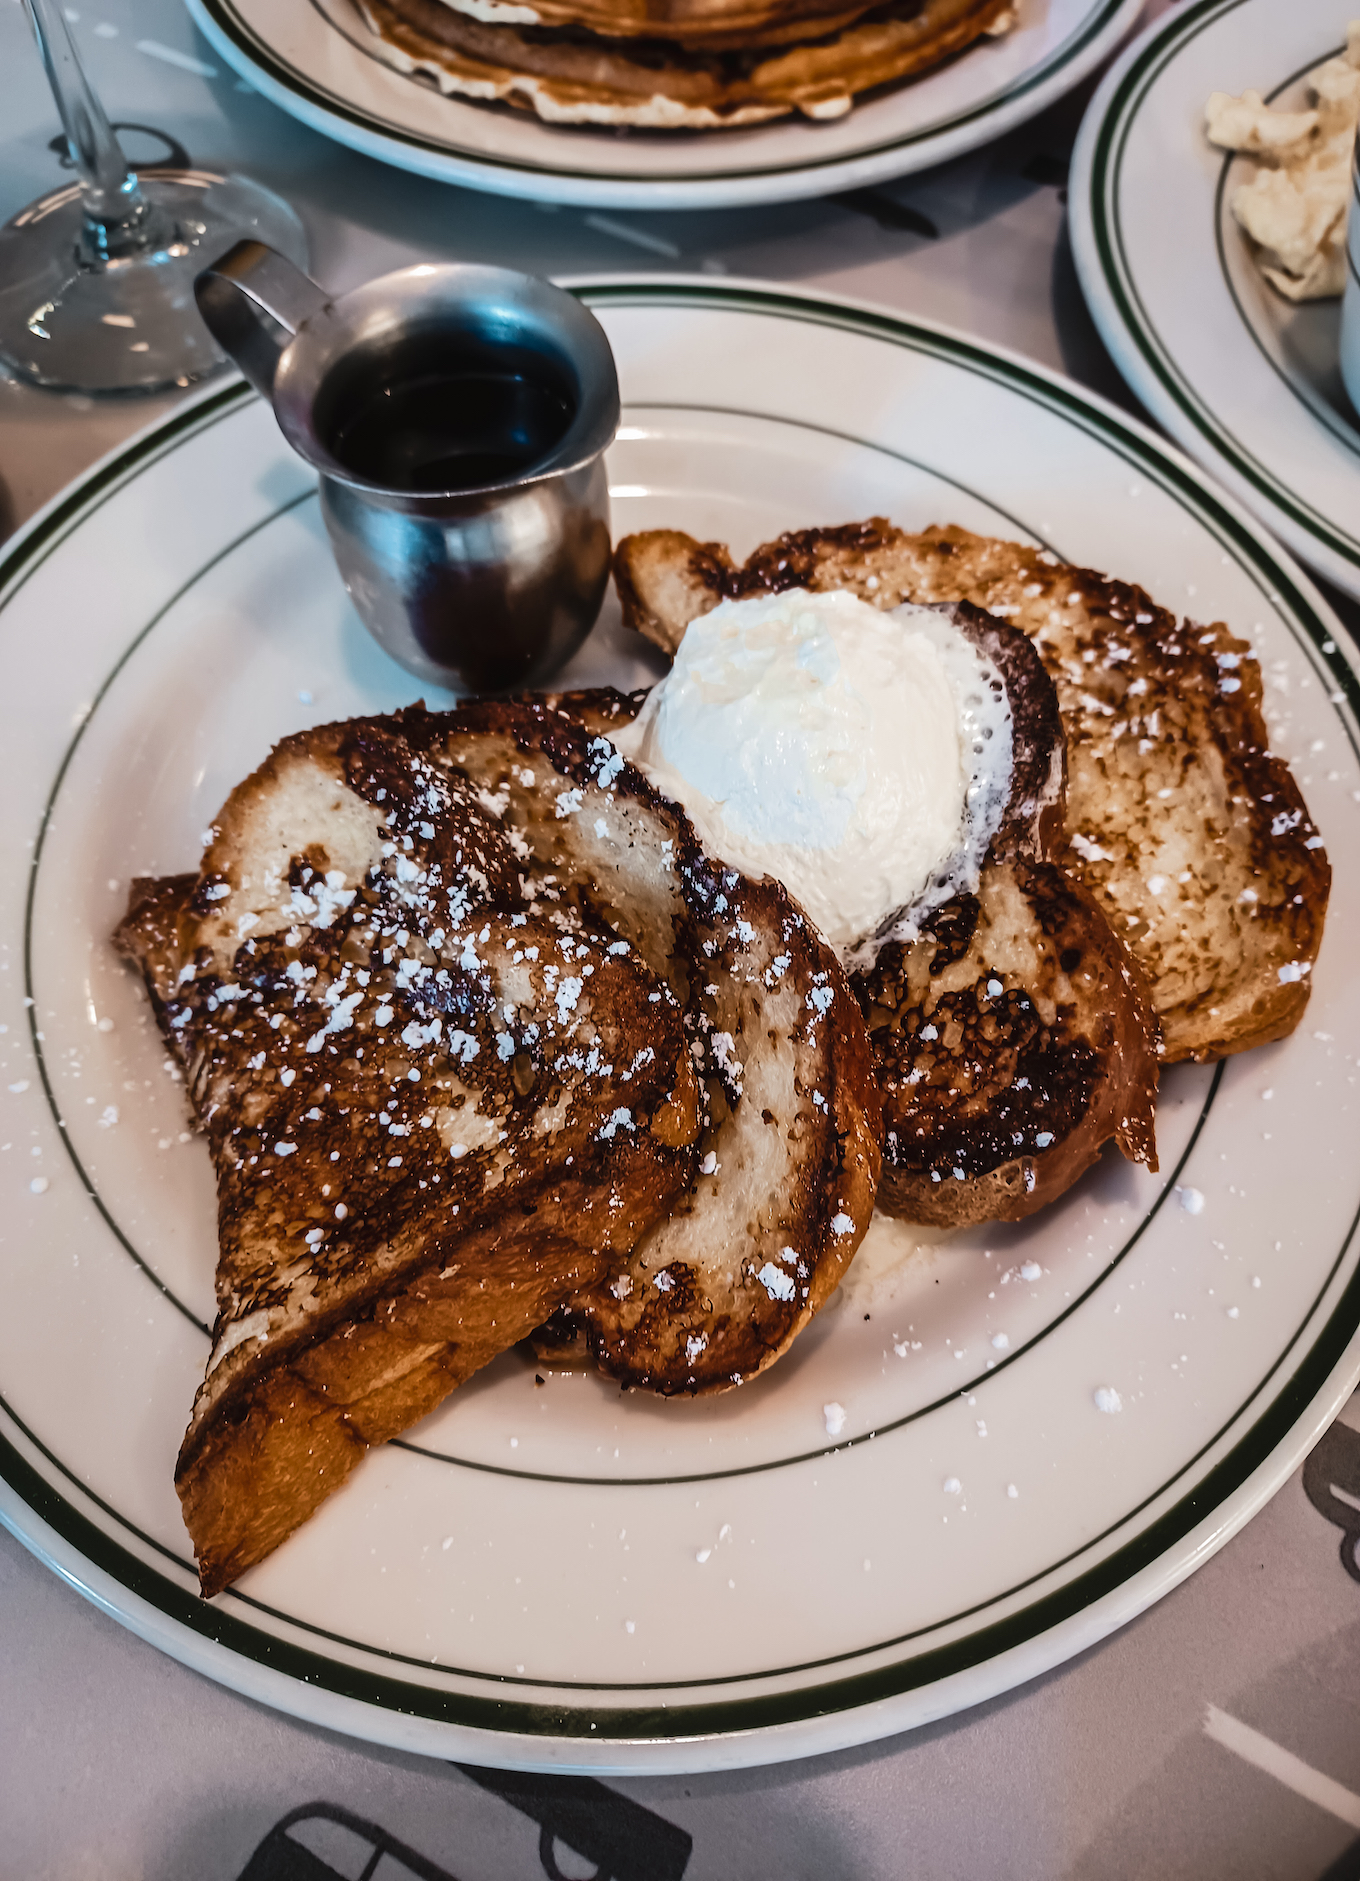 Photo of a plate full of French toast from Ari's Diner Washington DC